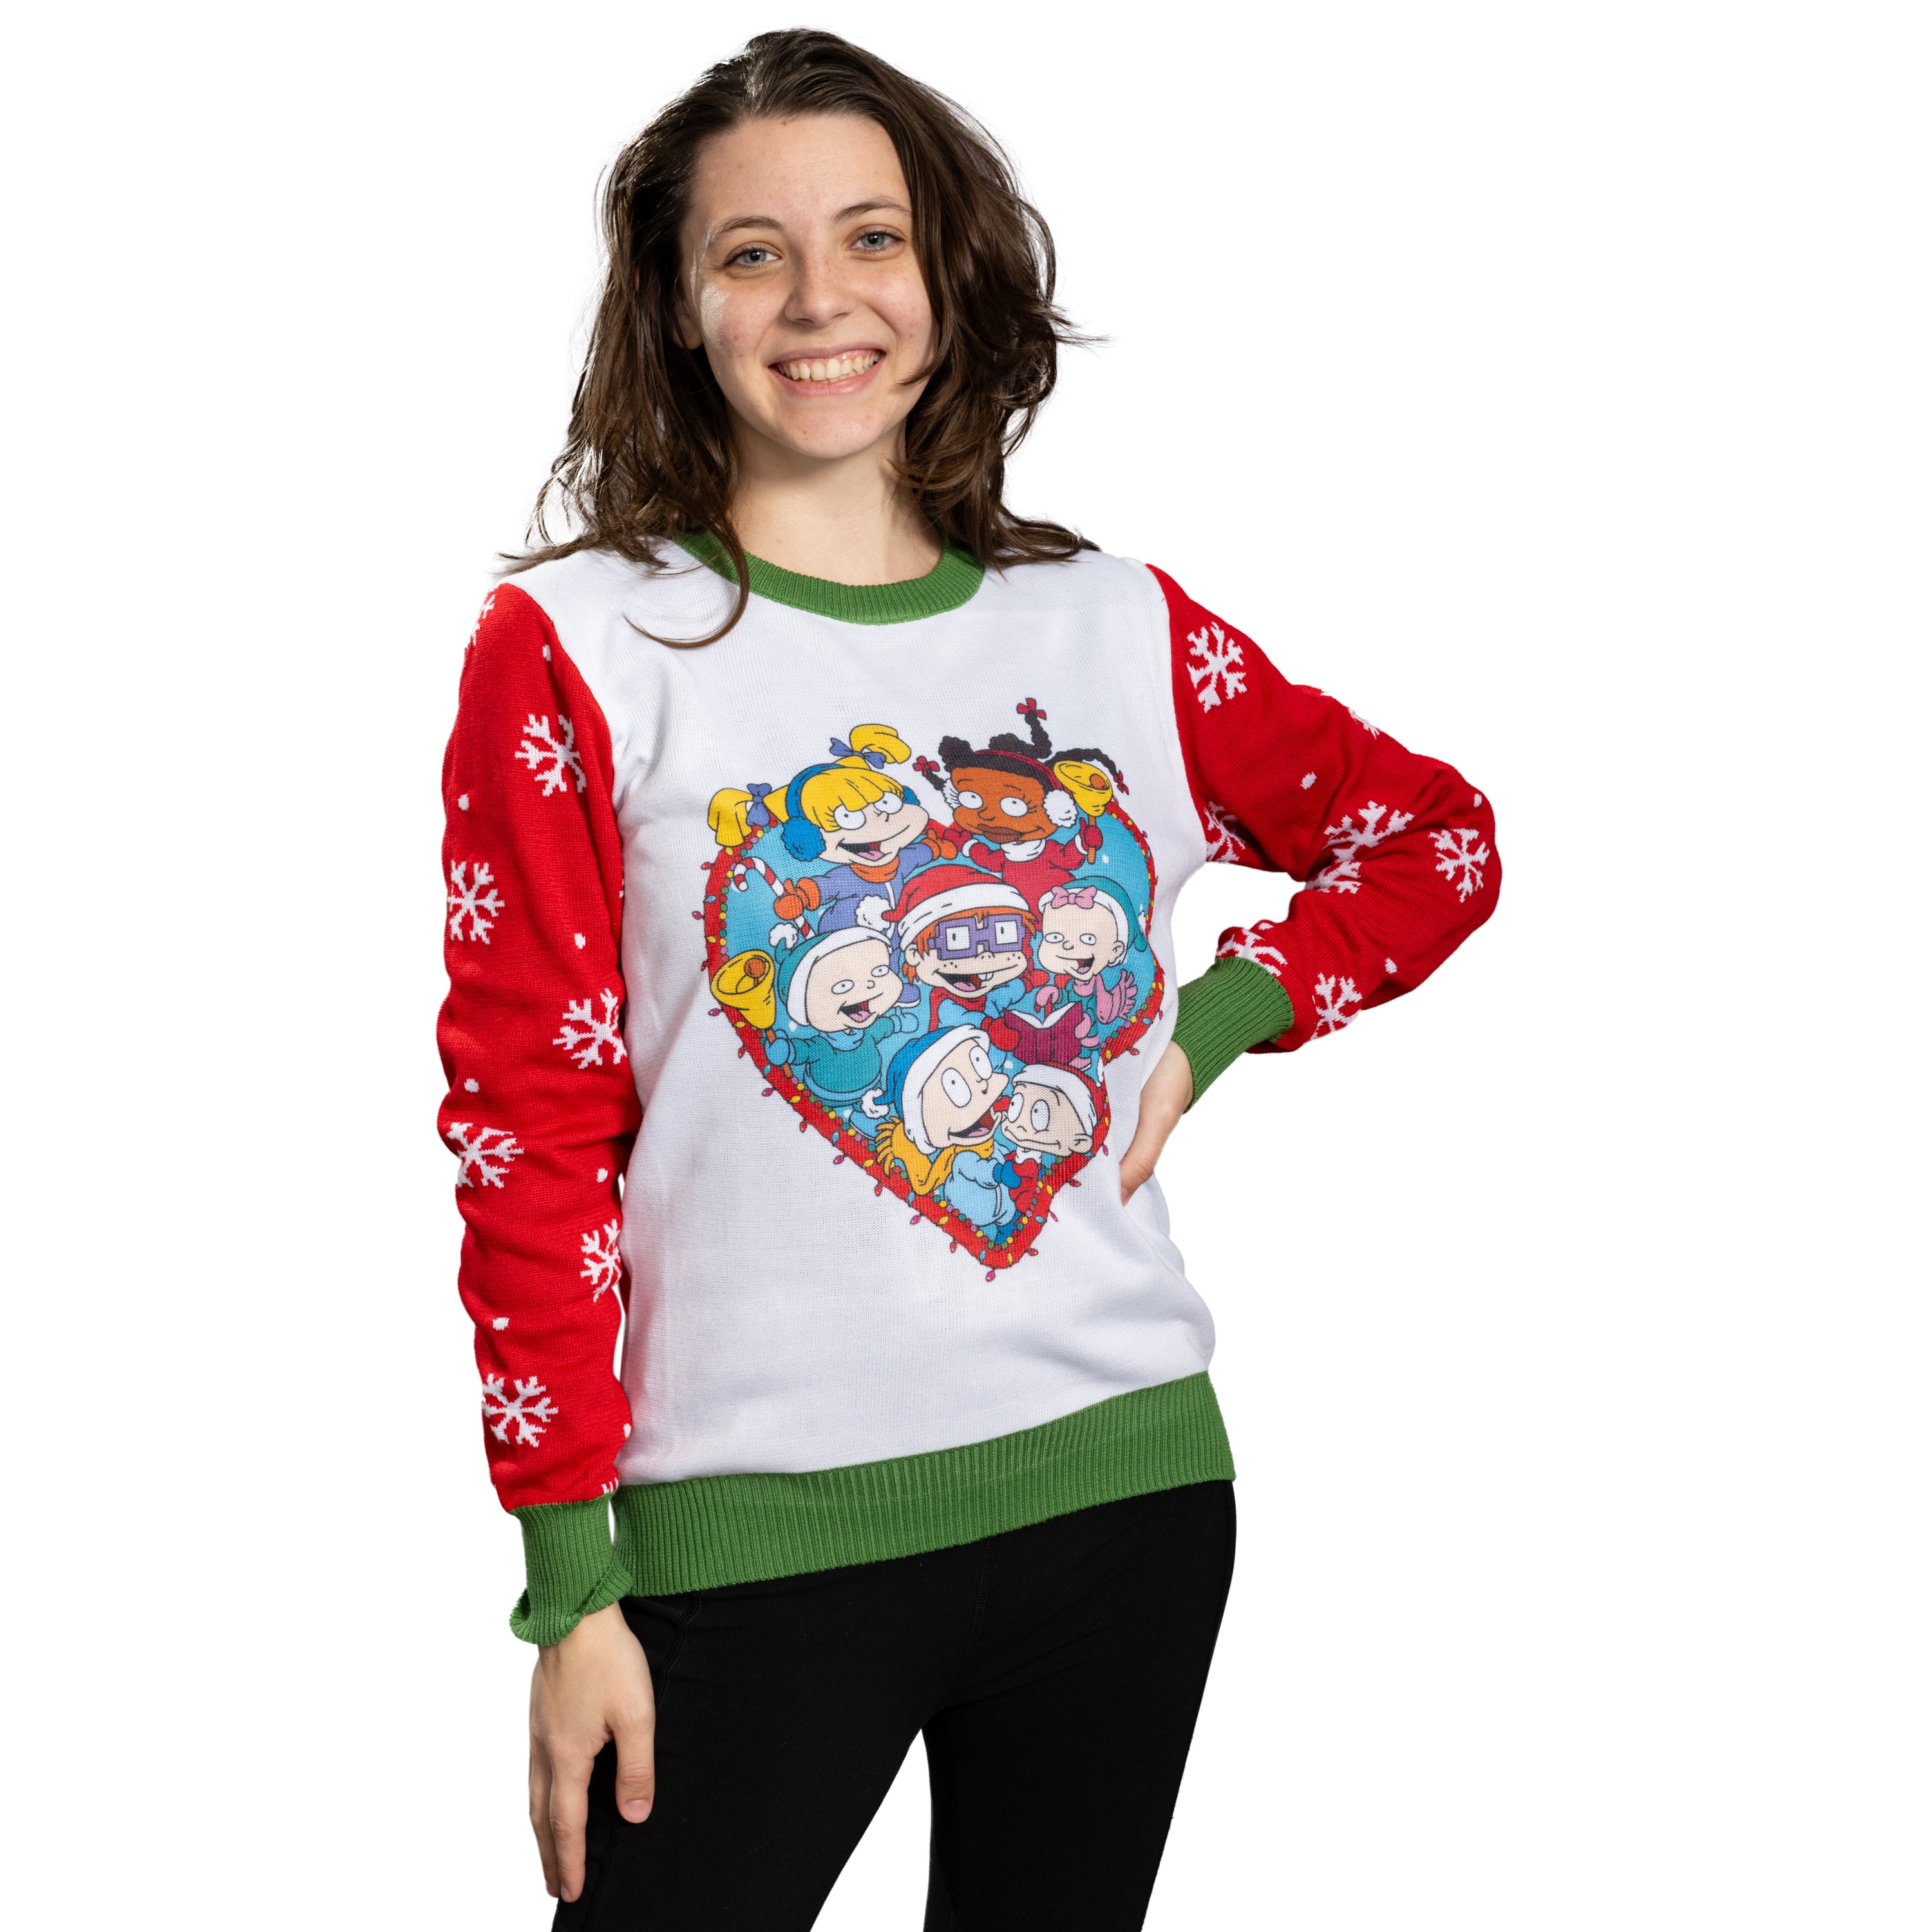 Rugrats "Winter Love" Ugly Christmas Sweater